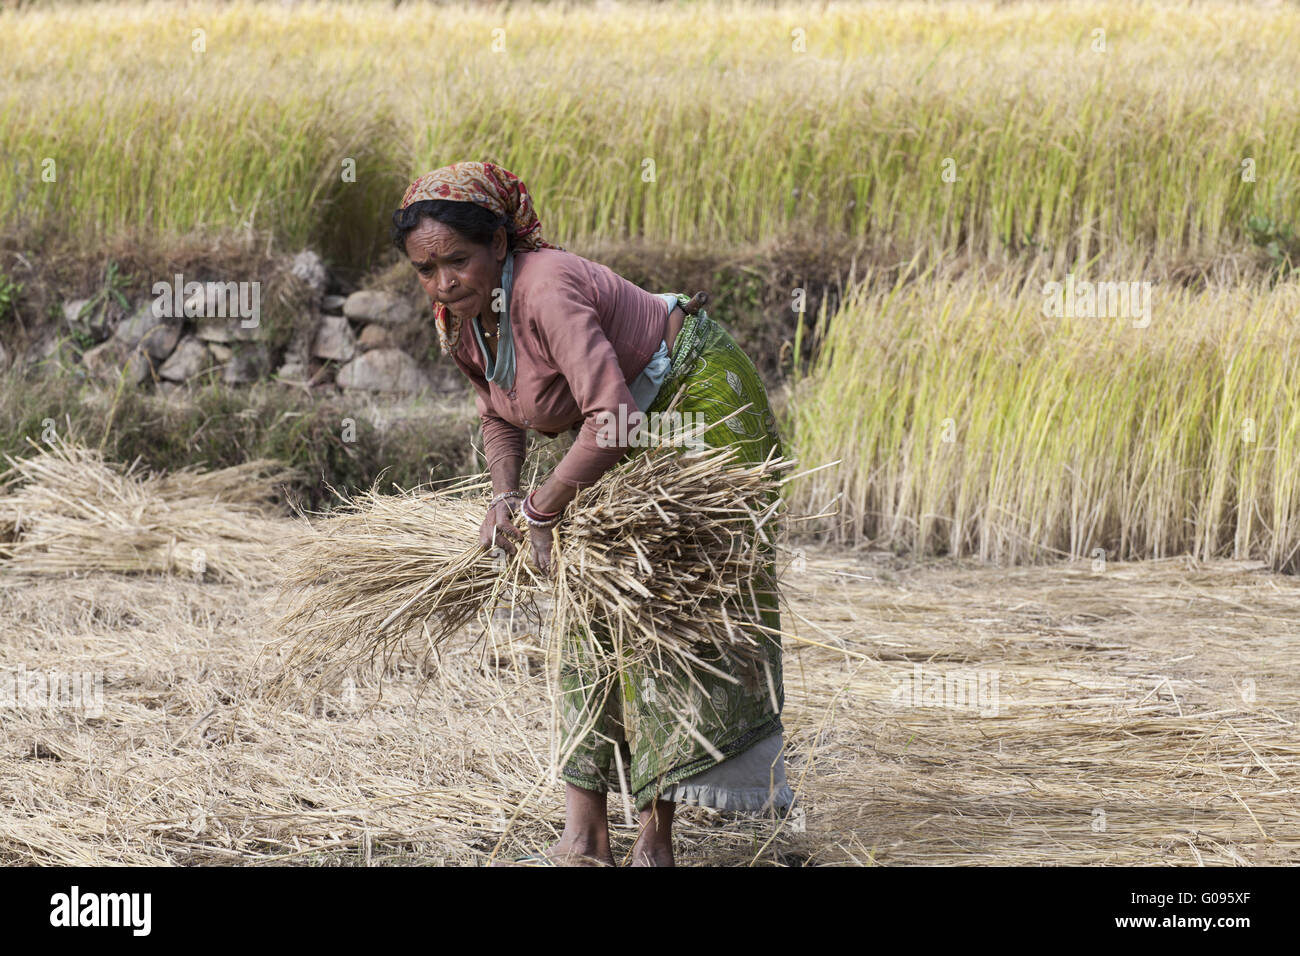 Indian woman harvest rice straw, North India Stock Photo